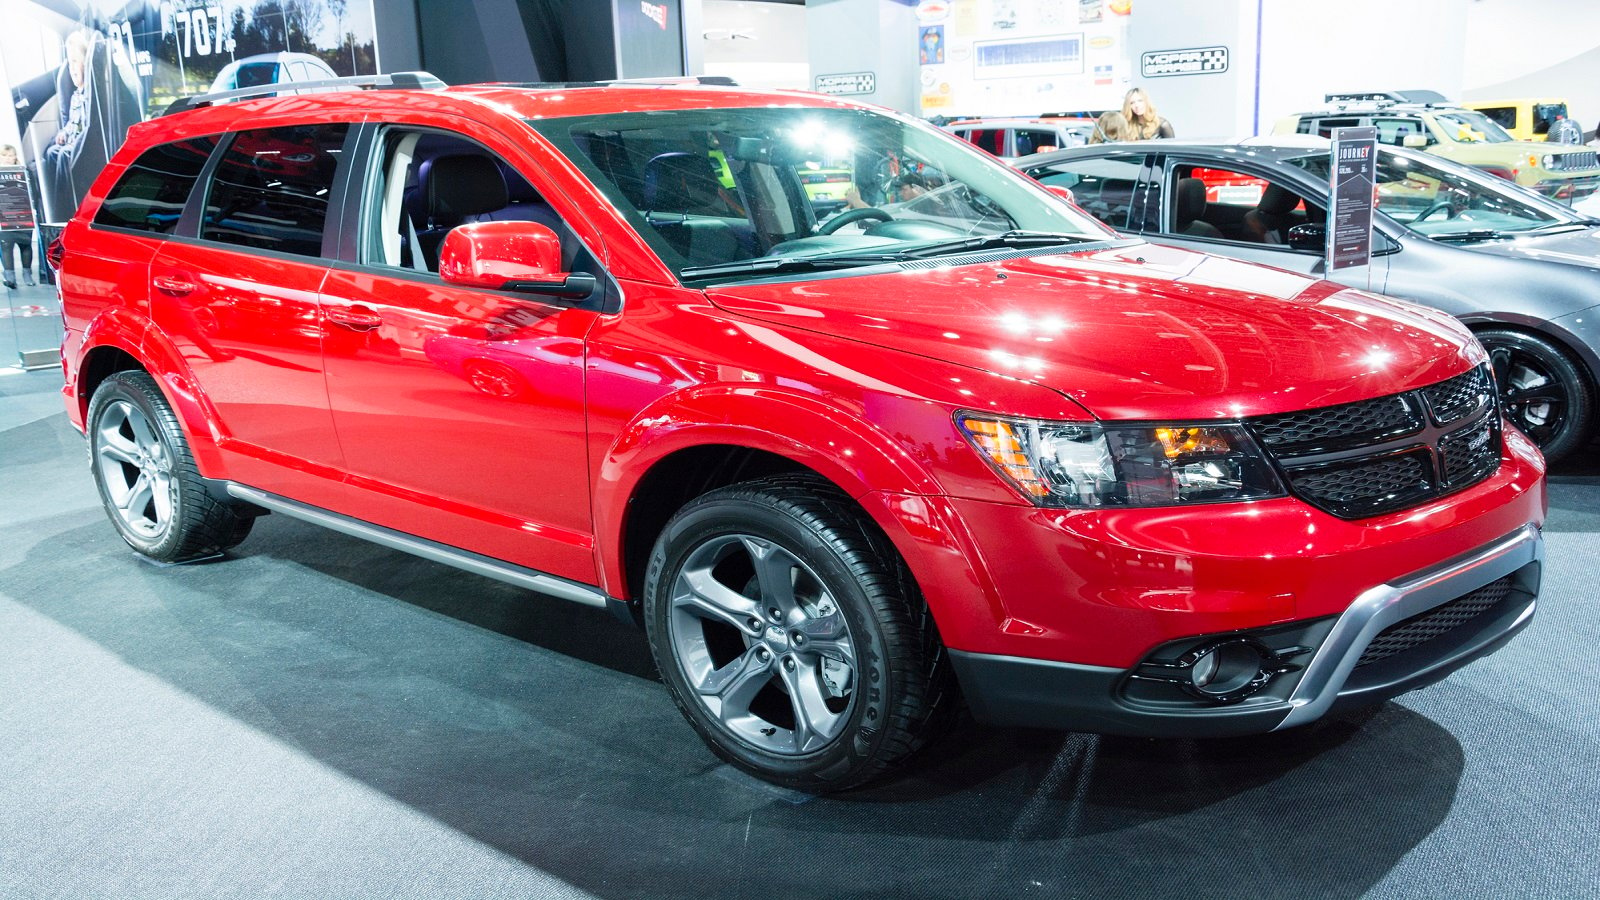 <p>The <strong>Dodge Journey</strong> is known for its good reliability score, however, some model years have faced issues. Notably, the 2009 and 2010 models experienced brake and engine problems. In contrast, the 2011, 2013, 2016, 2019, and 2020 models saw significant improvements, including a revamped interior and enhanced safety features.</p>